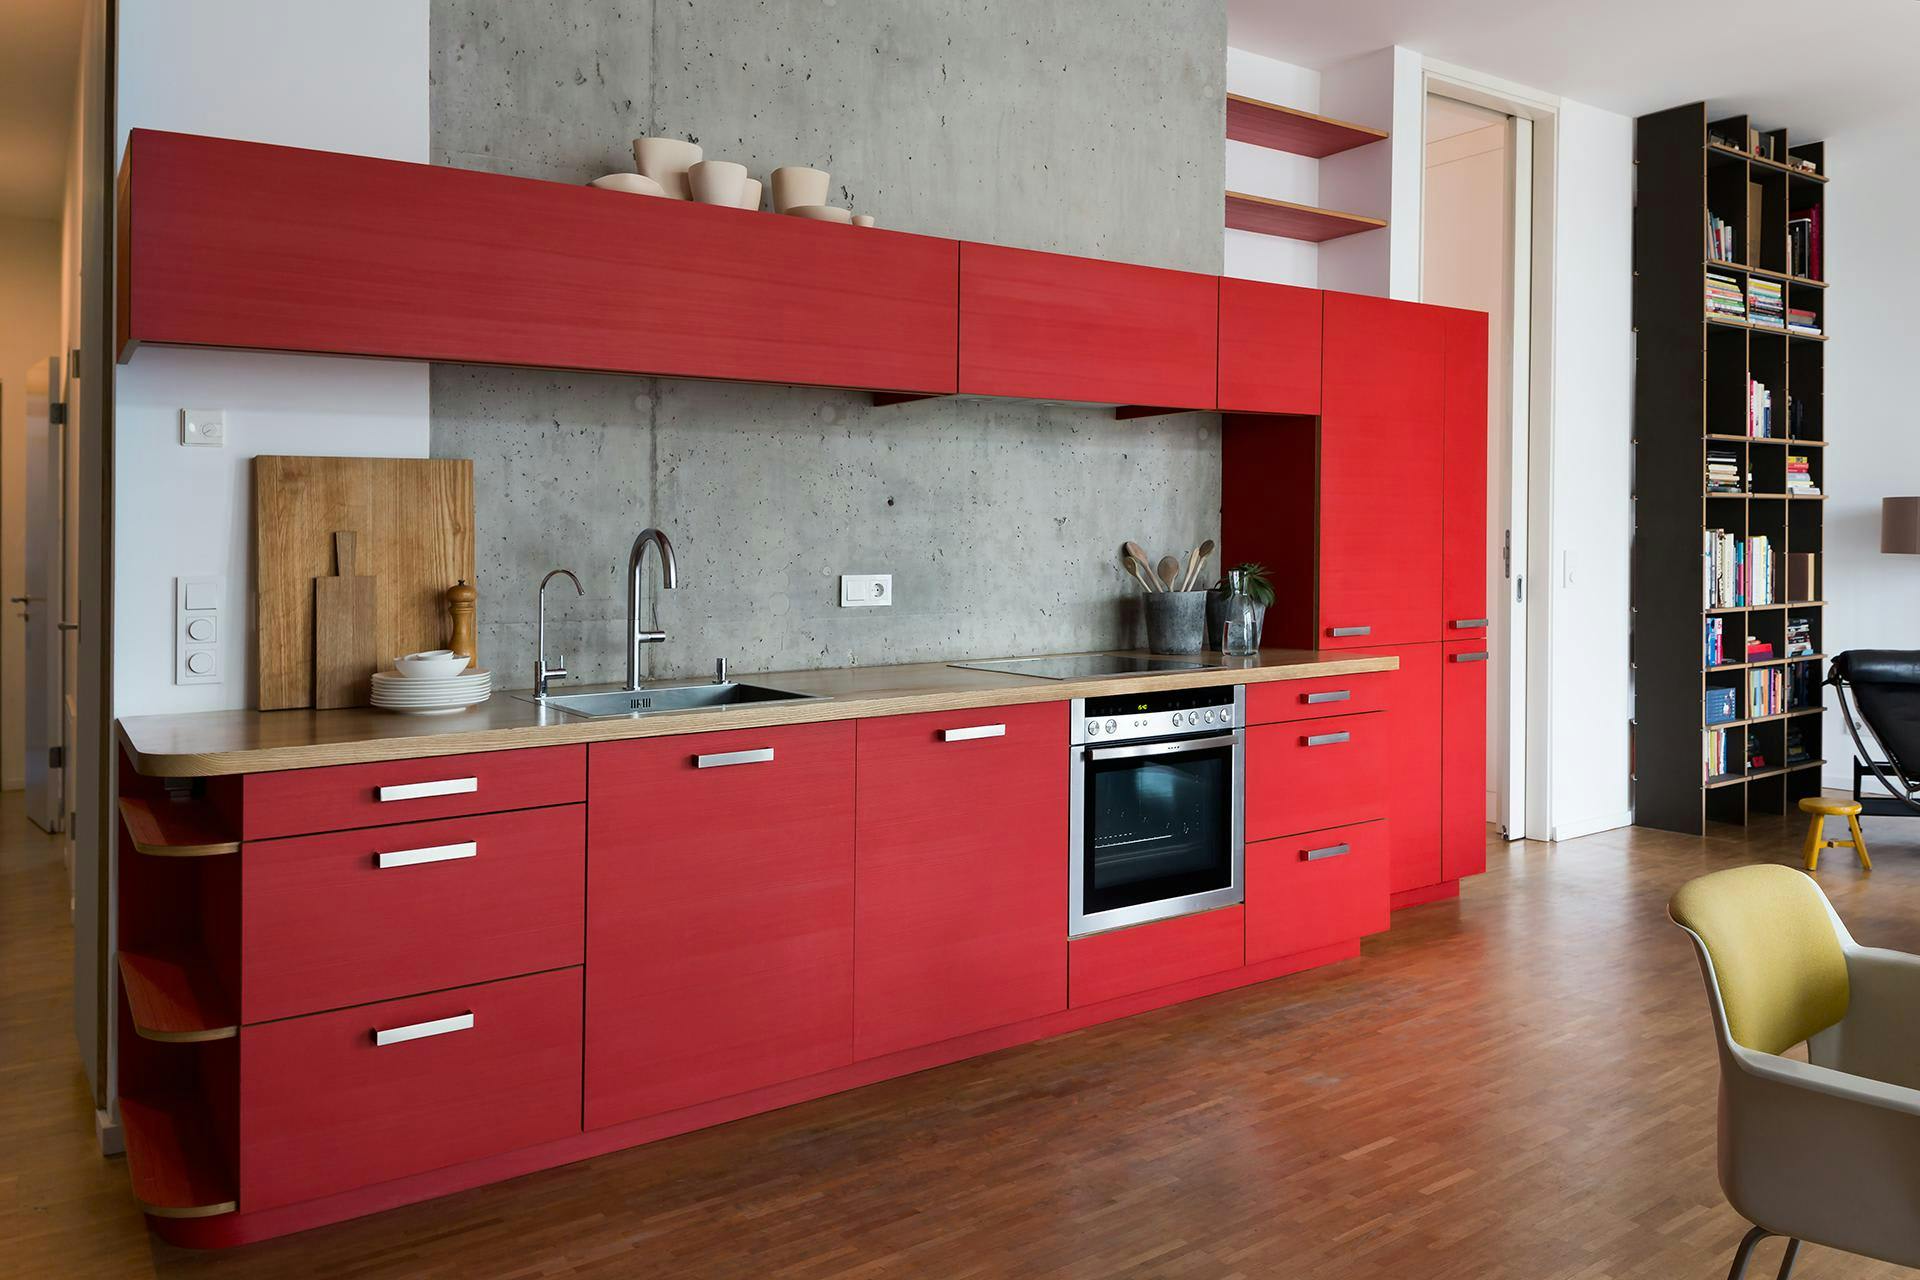 The image showcases a modern, red kitchen with a large island and a stainless steel oven. The kitchen is well-equipped with various appliances, including a microwave, a toaster, and a sink. The island is surrounded by a bookshelf, which is filled with numerous books.

The kitchen also features a dining table with a chair placed nearby. The room is decorated with a vase, a bowl, and a cup, adding a touch of elegance to the space. The overall atmosphere of the kitchen is bright and inviting, making it an ideal spot for